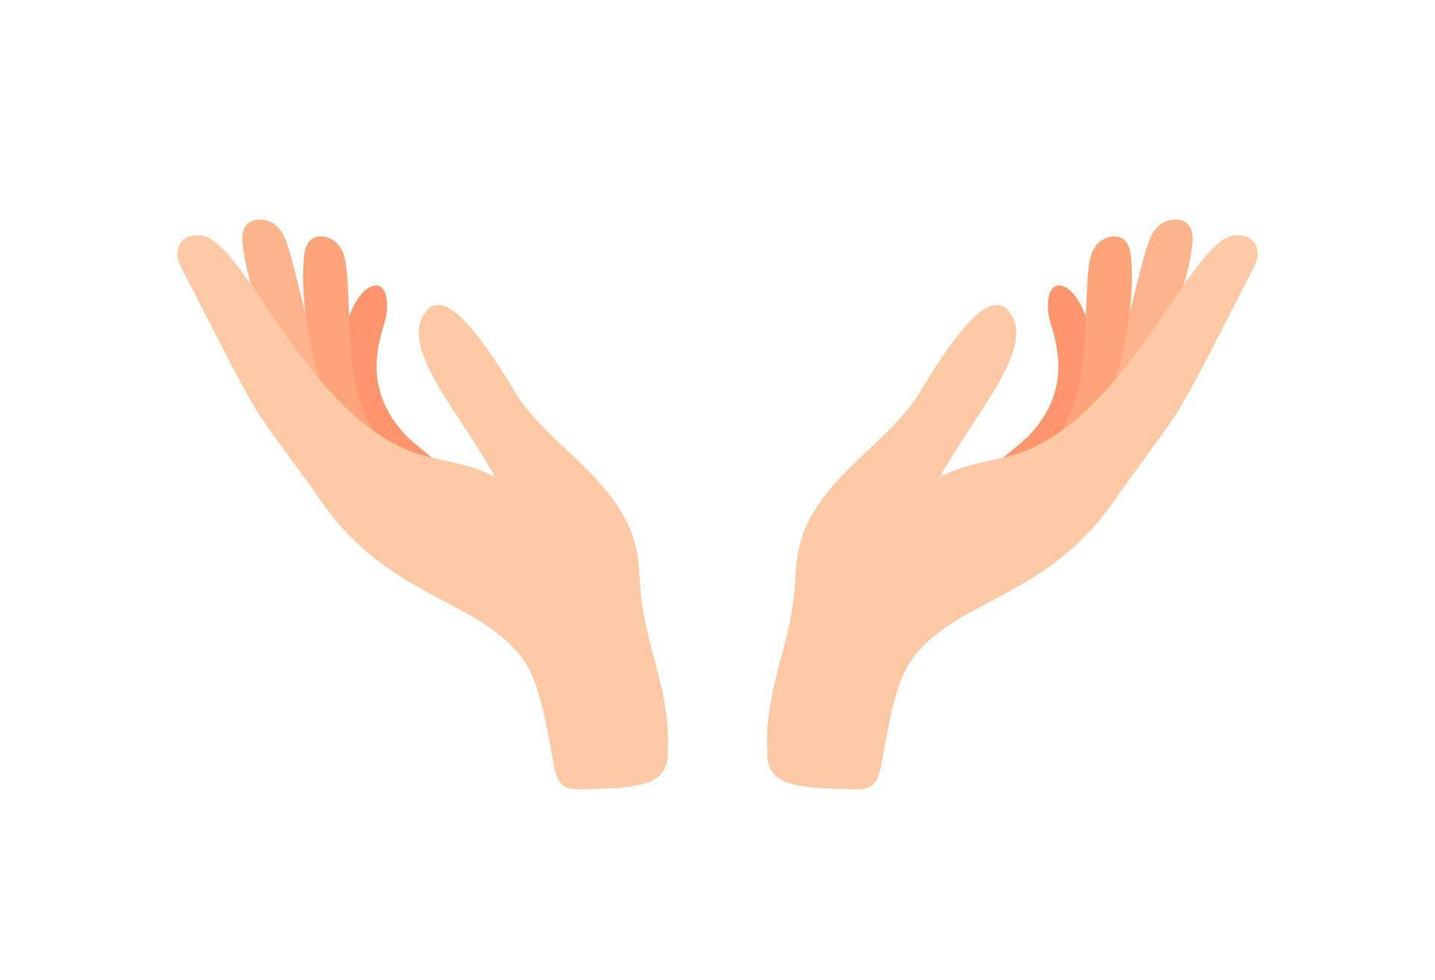 Facing up womans hands vector illustration isolated on white background. Support, peace, care hand gesture icon. Female open palm up in getting or receiving something gesture, holding, showing